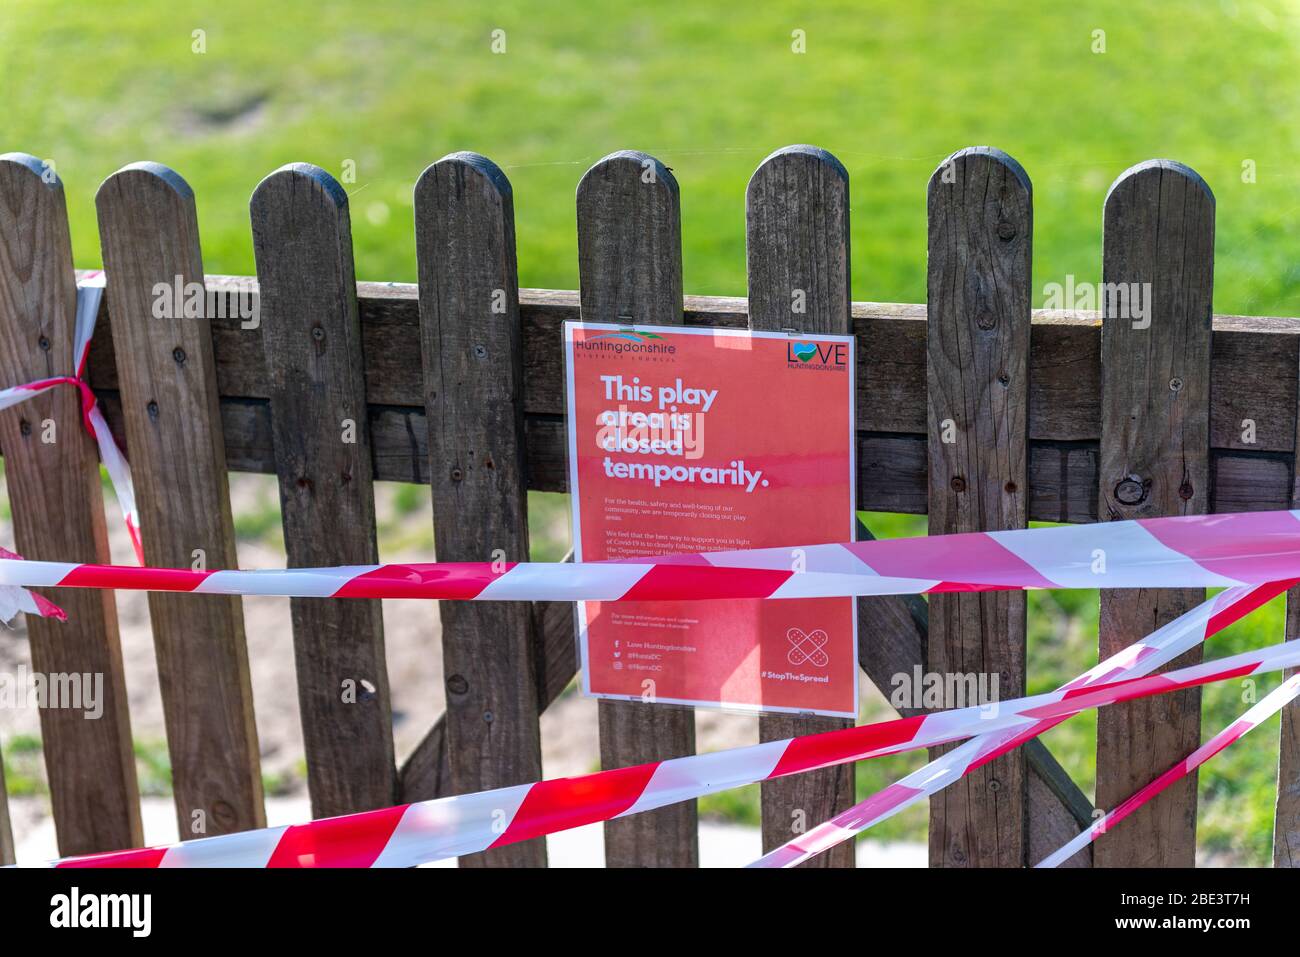 Huntingdon, Cambridgeshire, UK. 11th April 2020. Hinchingbrooke country park very empty on a very sunny easter Saturday during Covid-19 UK lockdown. People out for their once per day exercise. Credit: Jason Chillmaid/Alamy Live News Stock Photo